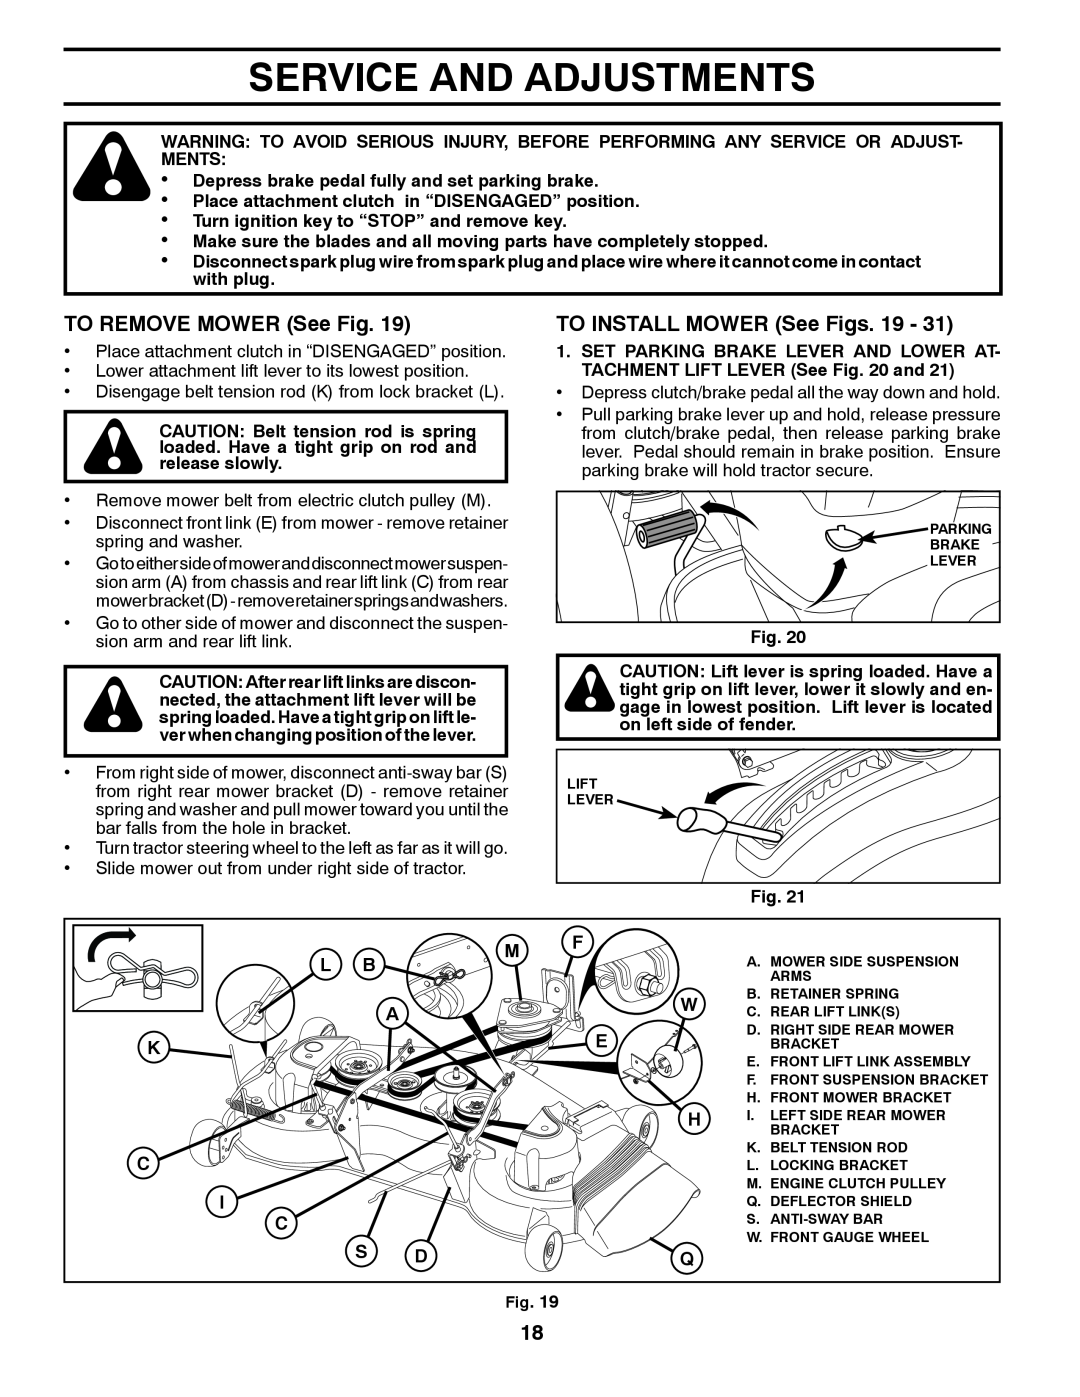 Husqvarna 96045003000, 532 44 05-66 owner manual Service And Adjustments, TO REMOVE MOWER See Fig, TO INSTALL MOWER See Figs 